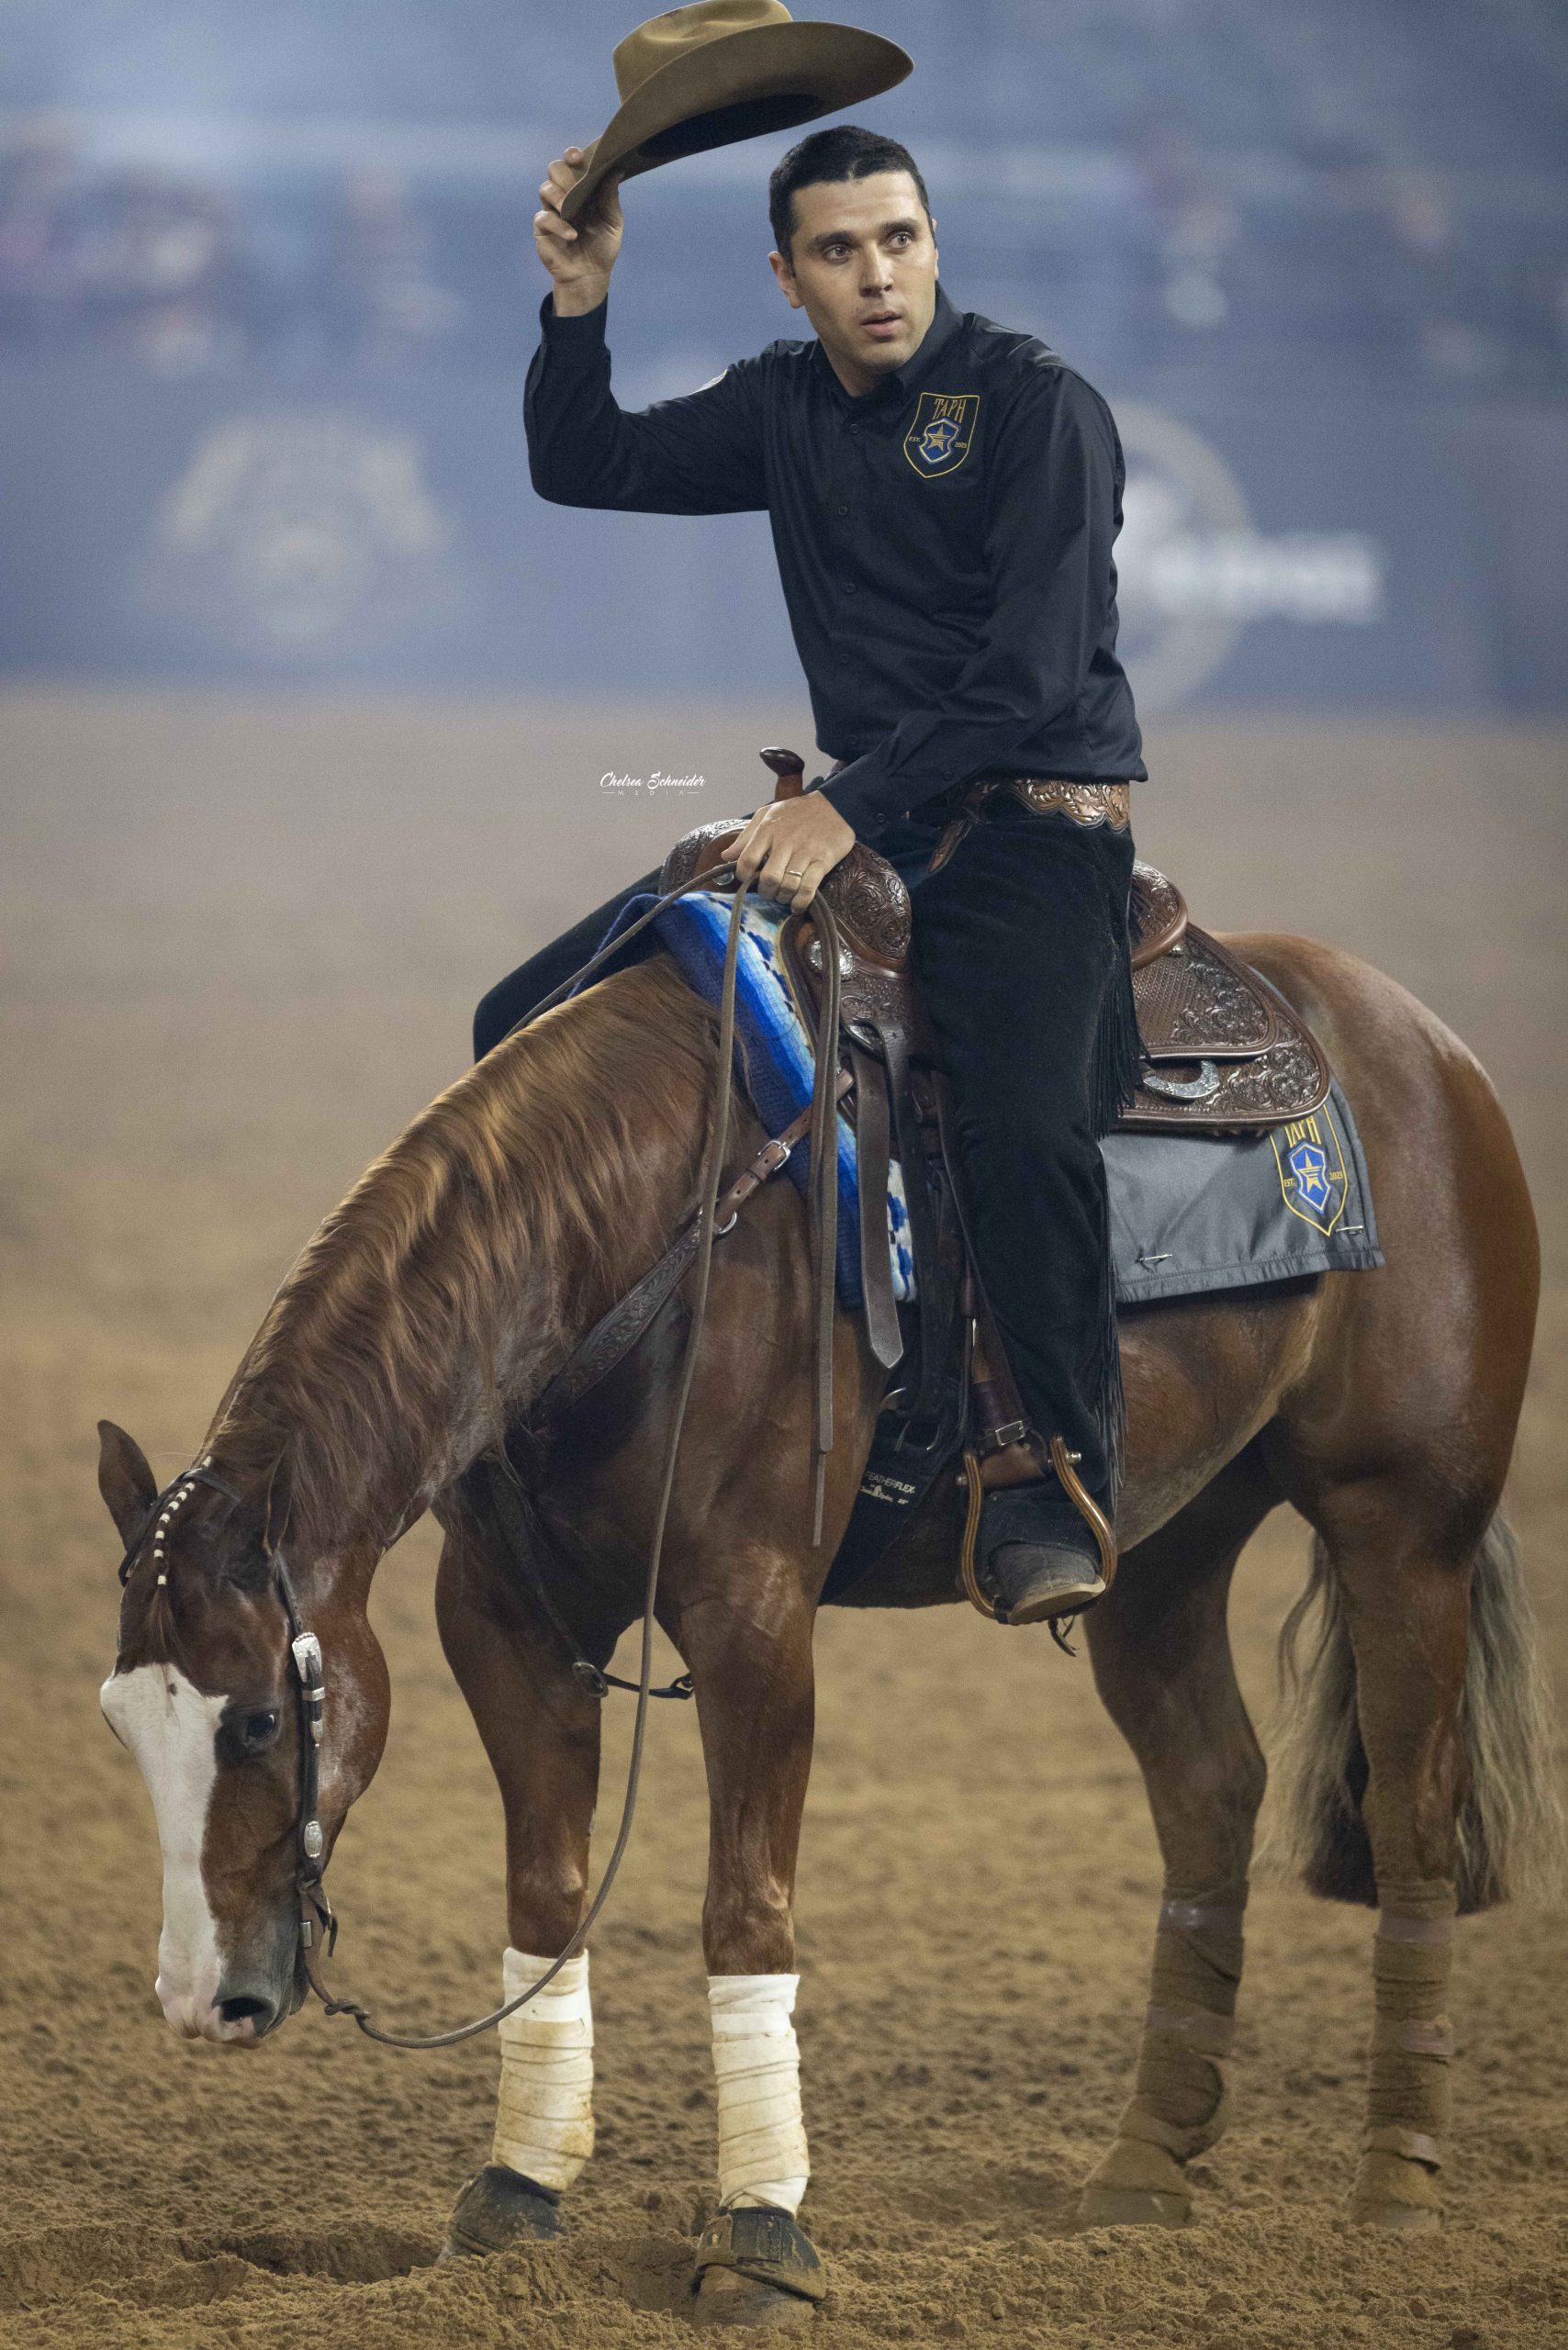 Fernando Salgado tips his hat to the crowd while in the arena during the 2023 American Performance Horseman competition.